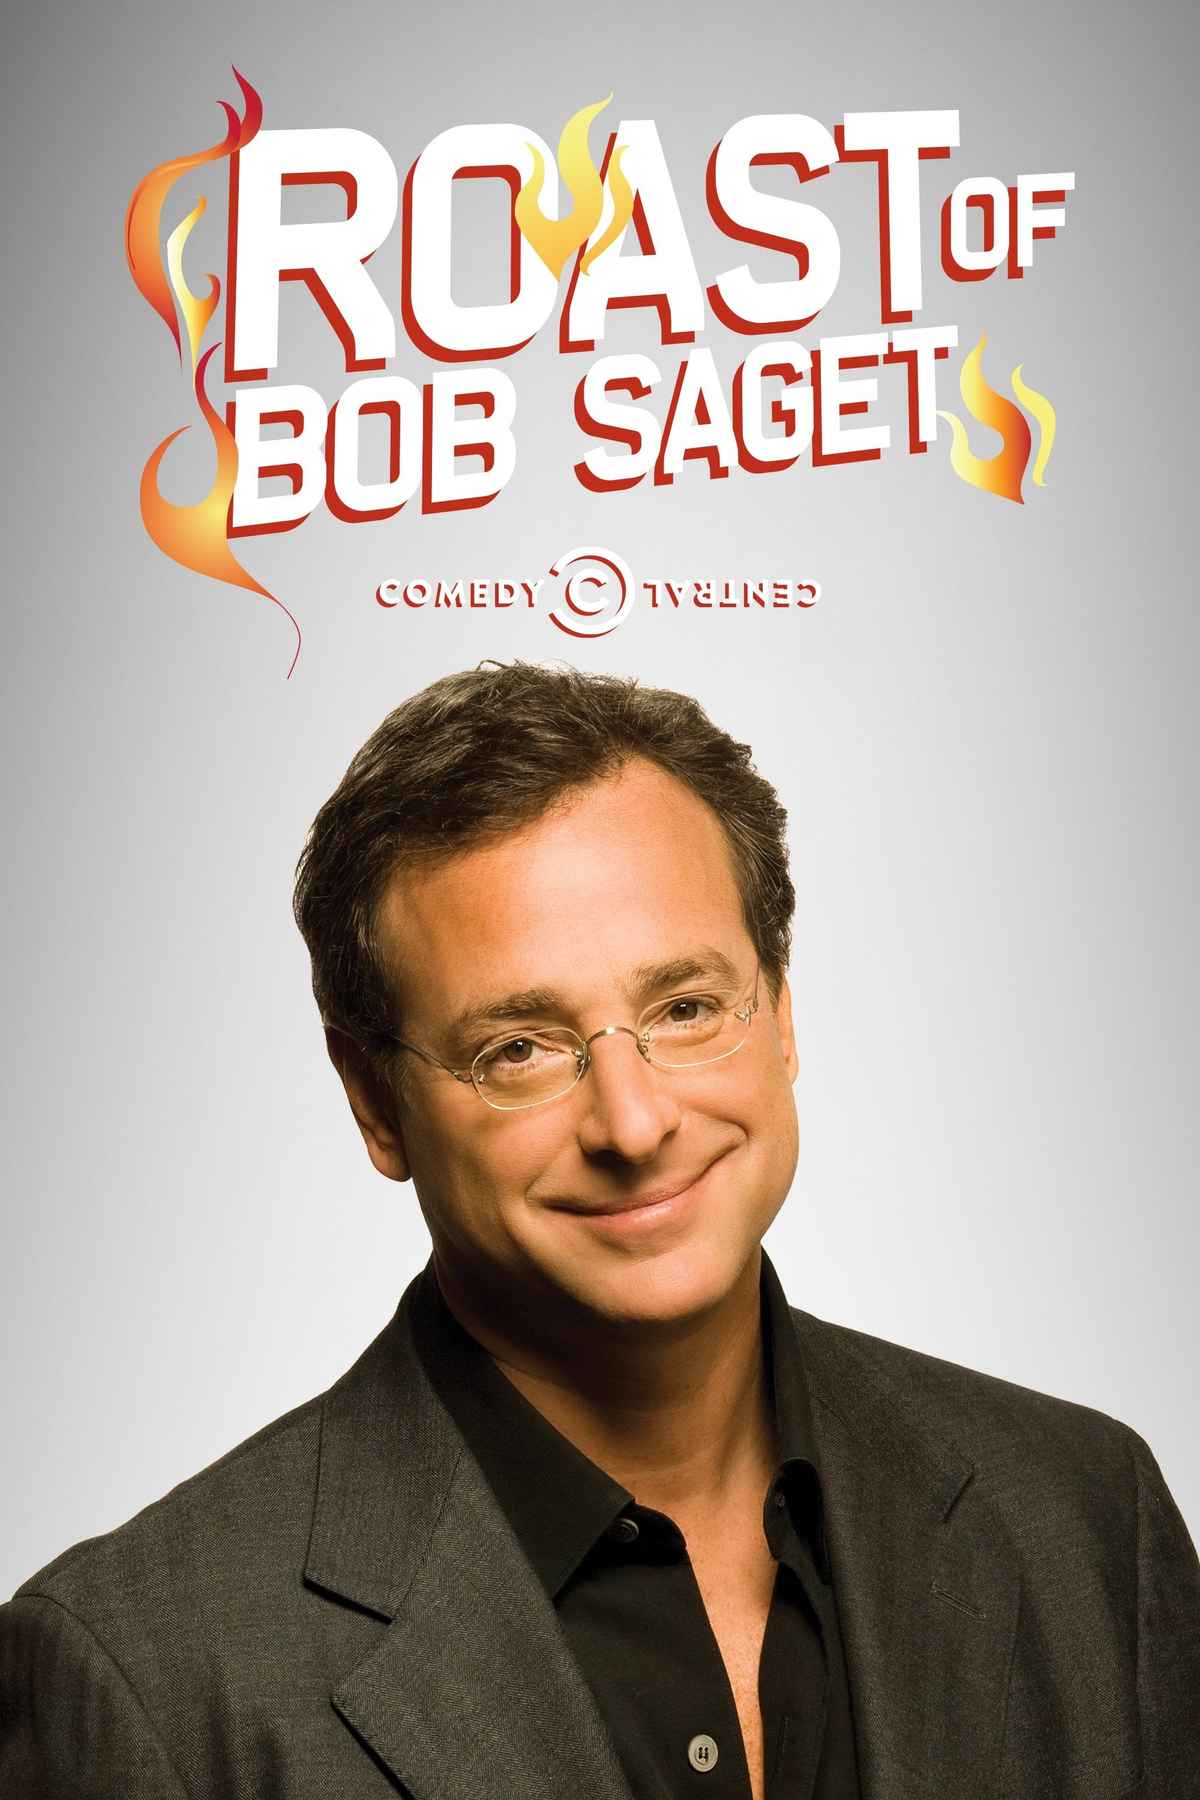 Bob Saget Best Movies, TV Shows and Web Series List